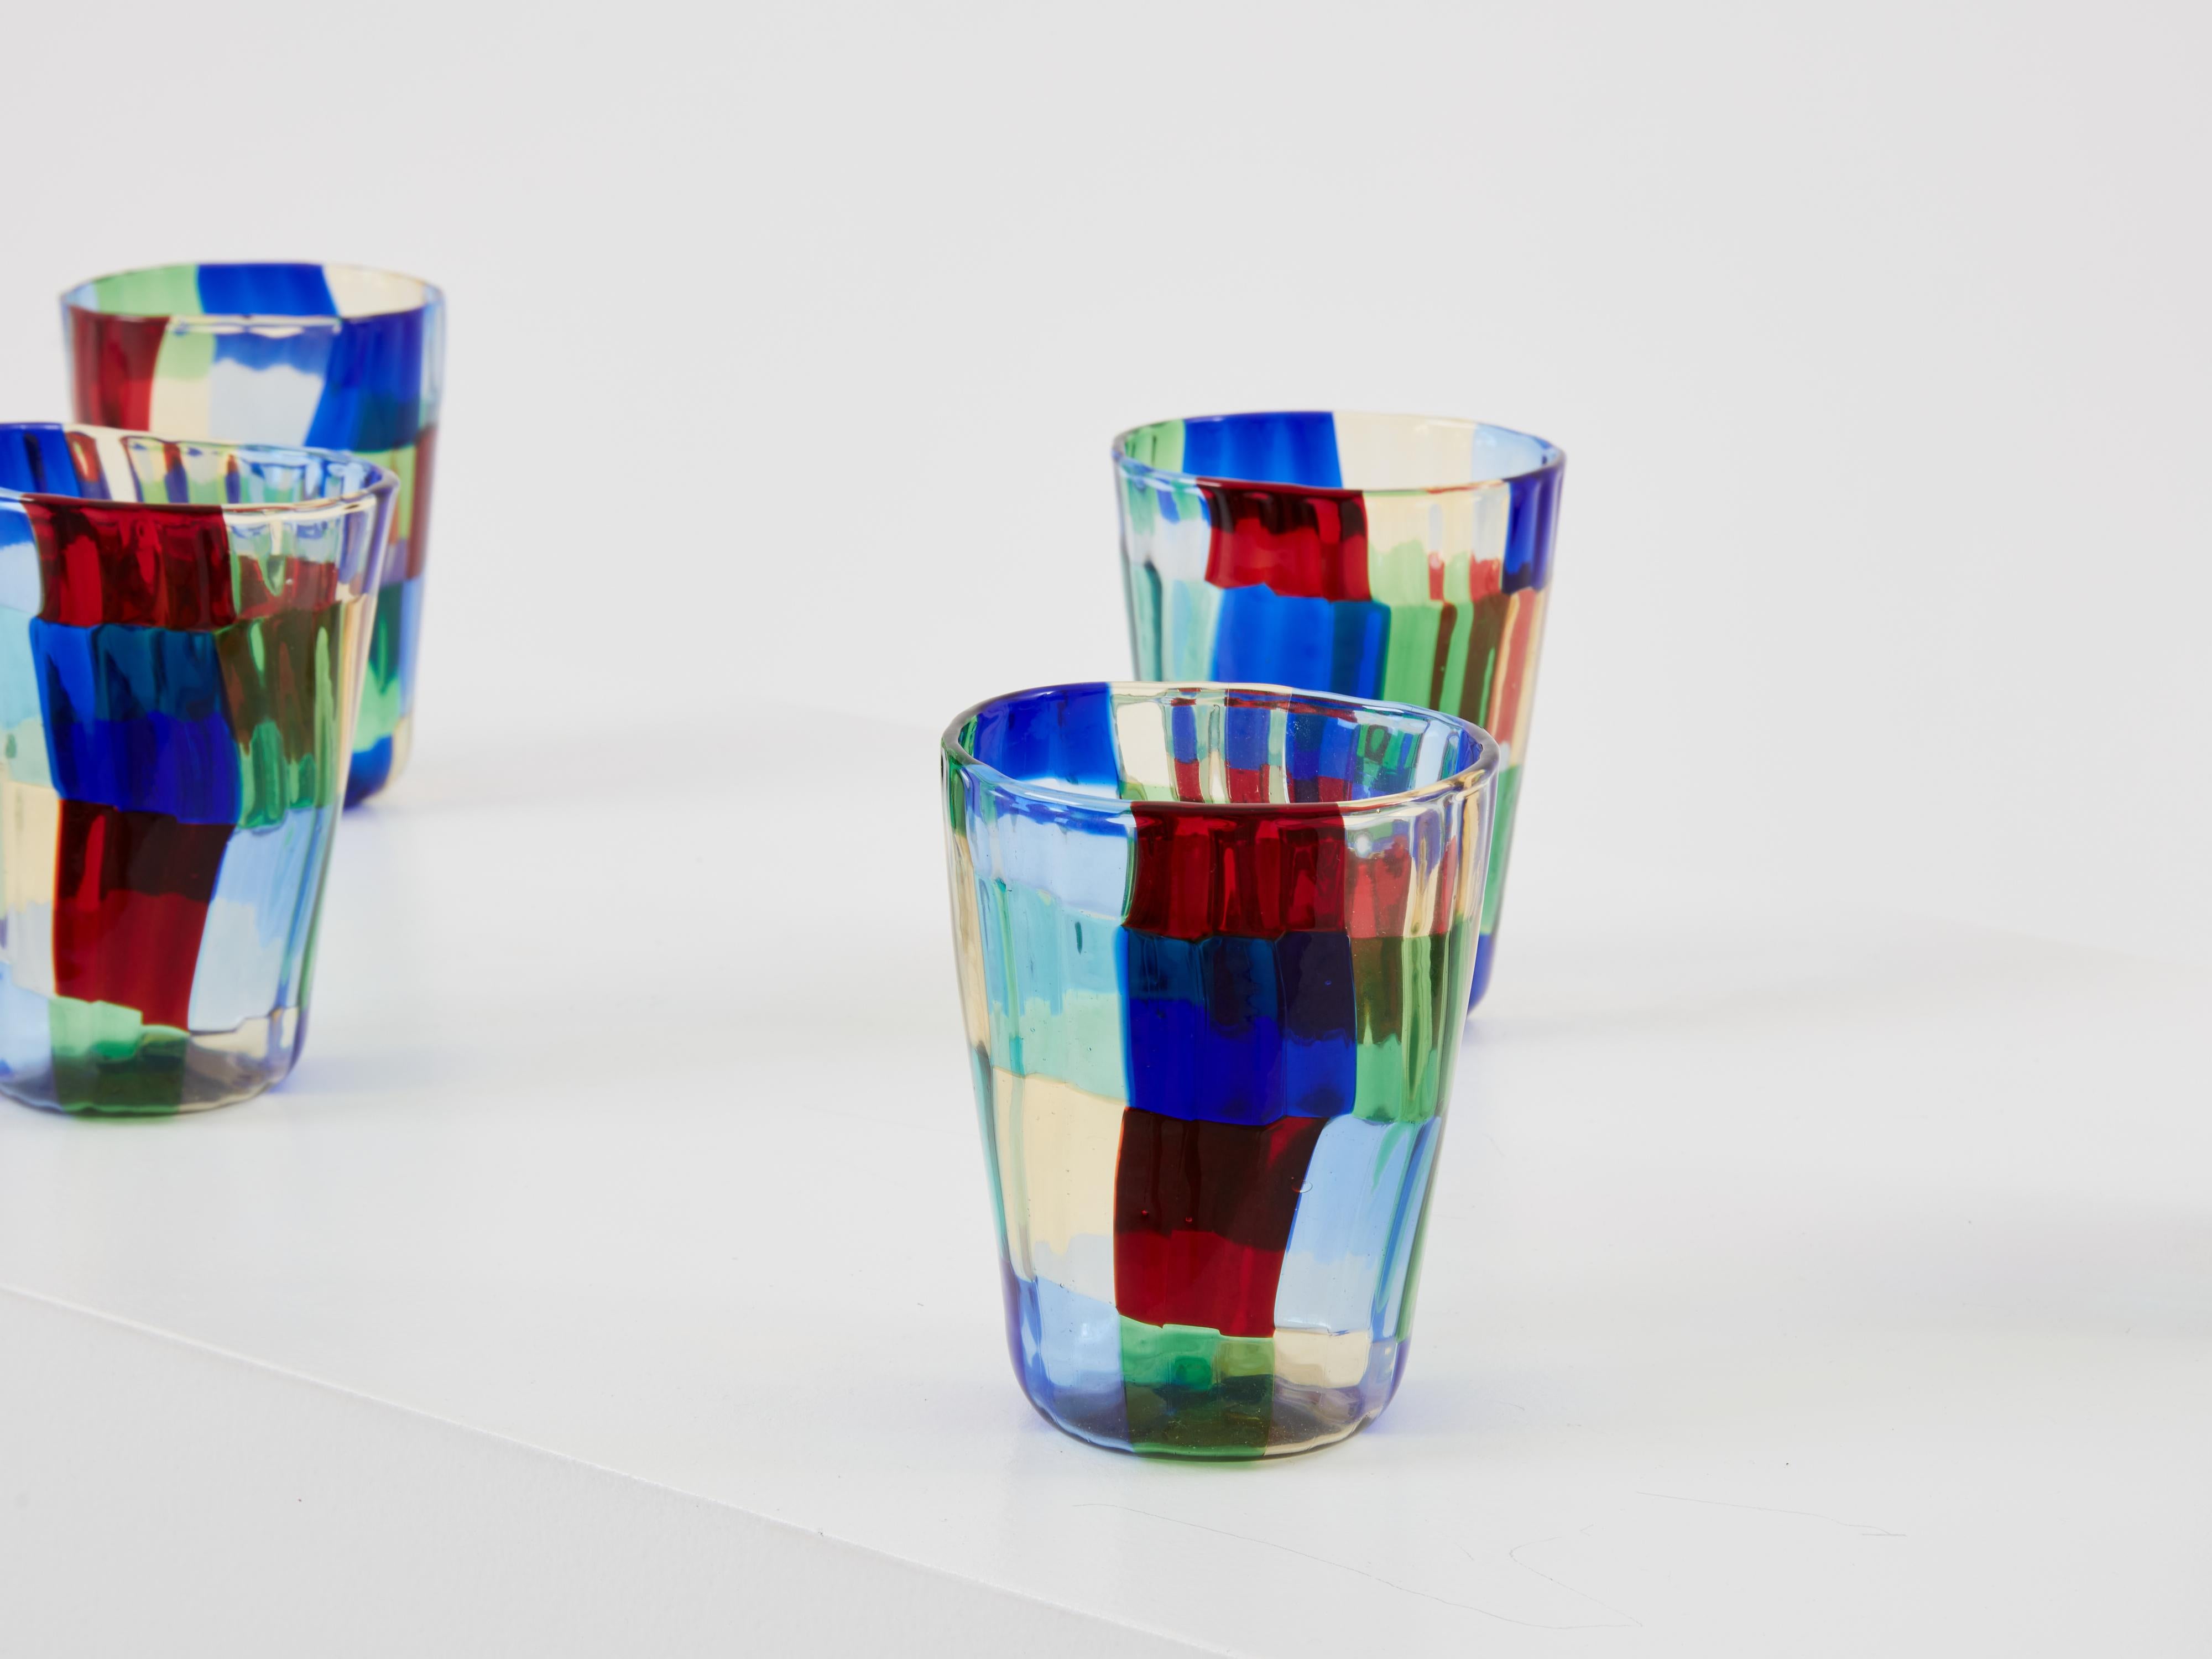 This is a beautiful set of six colorful Murano glass tumblers made in Italy in the 1980s. These are inspired by Fulvio Bianconi and Paolo Venini tumblers “Pezzato” models from the Parigi serie. This beautiful set of murano pieces has eye-catching